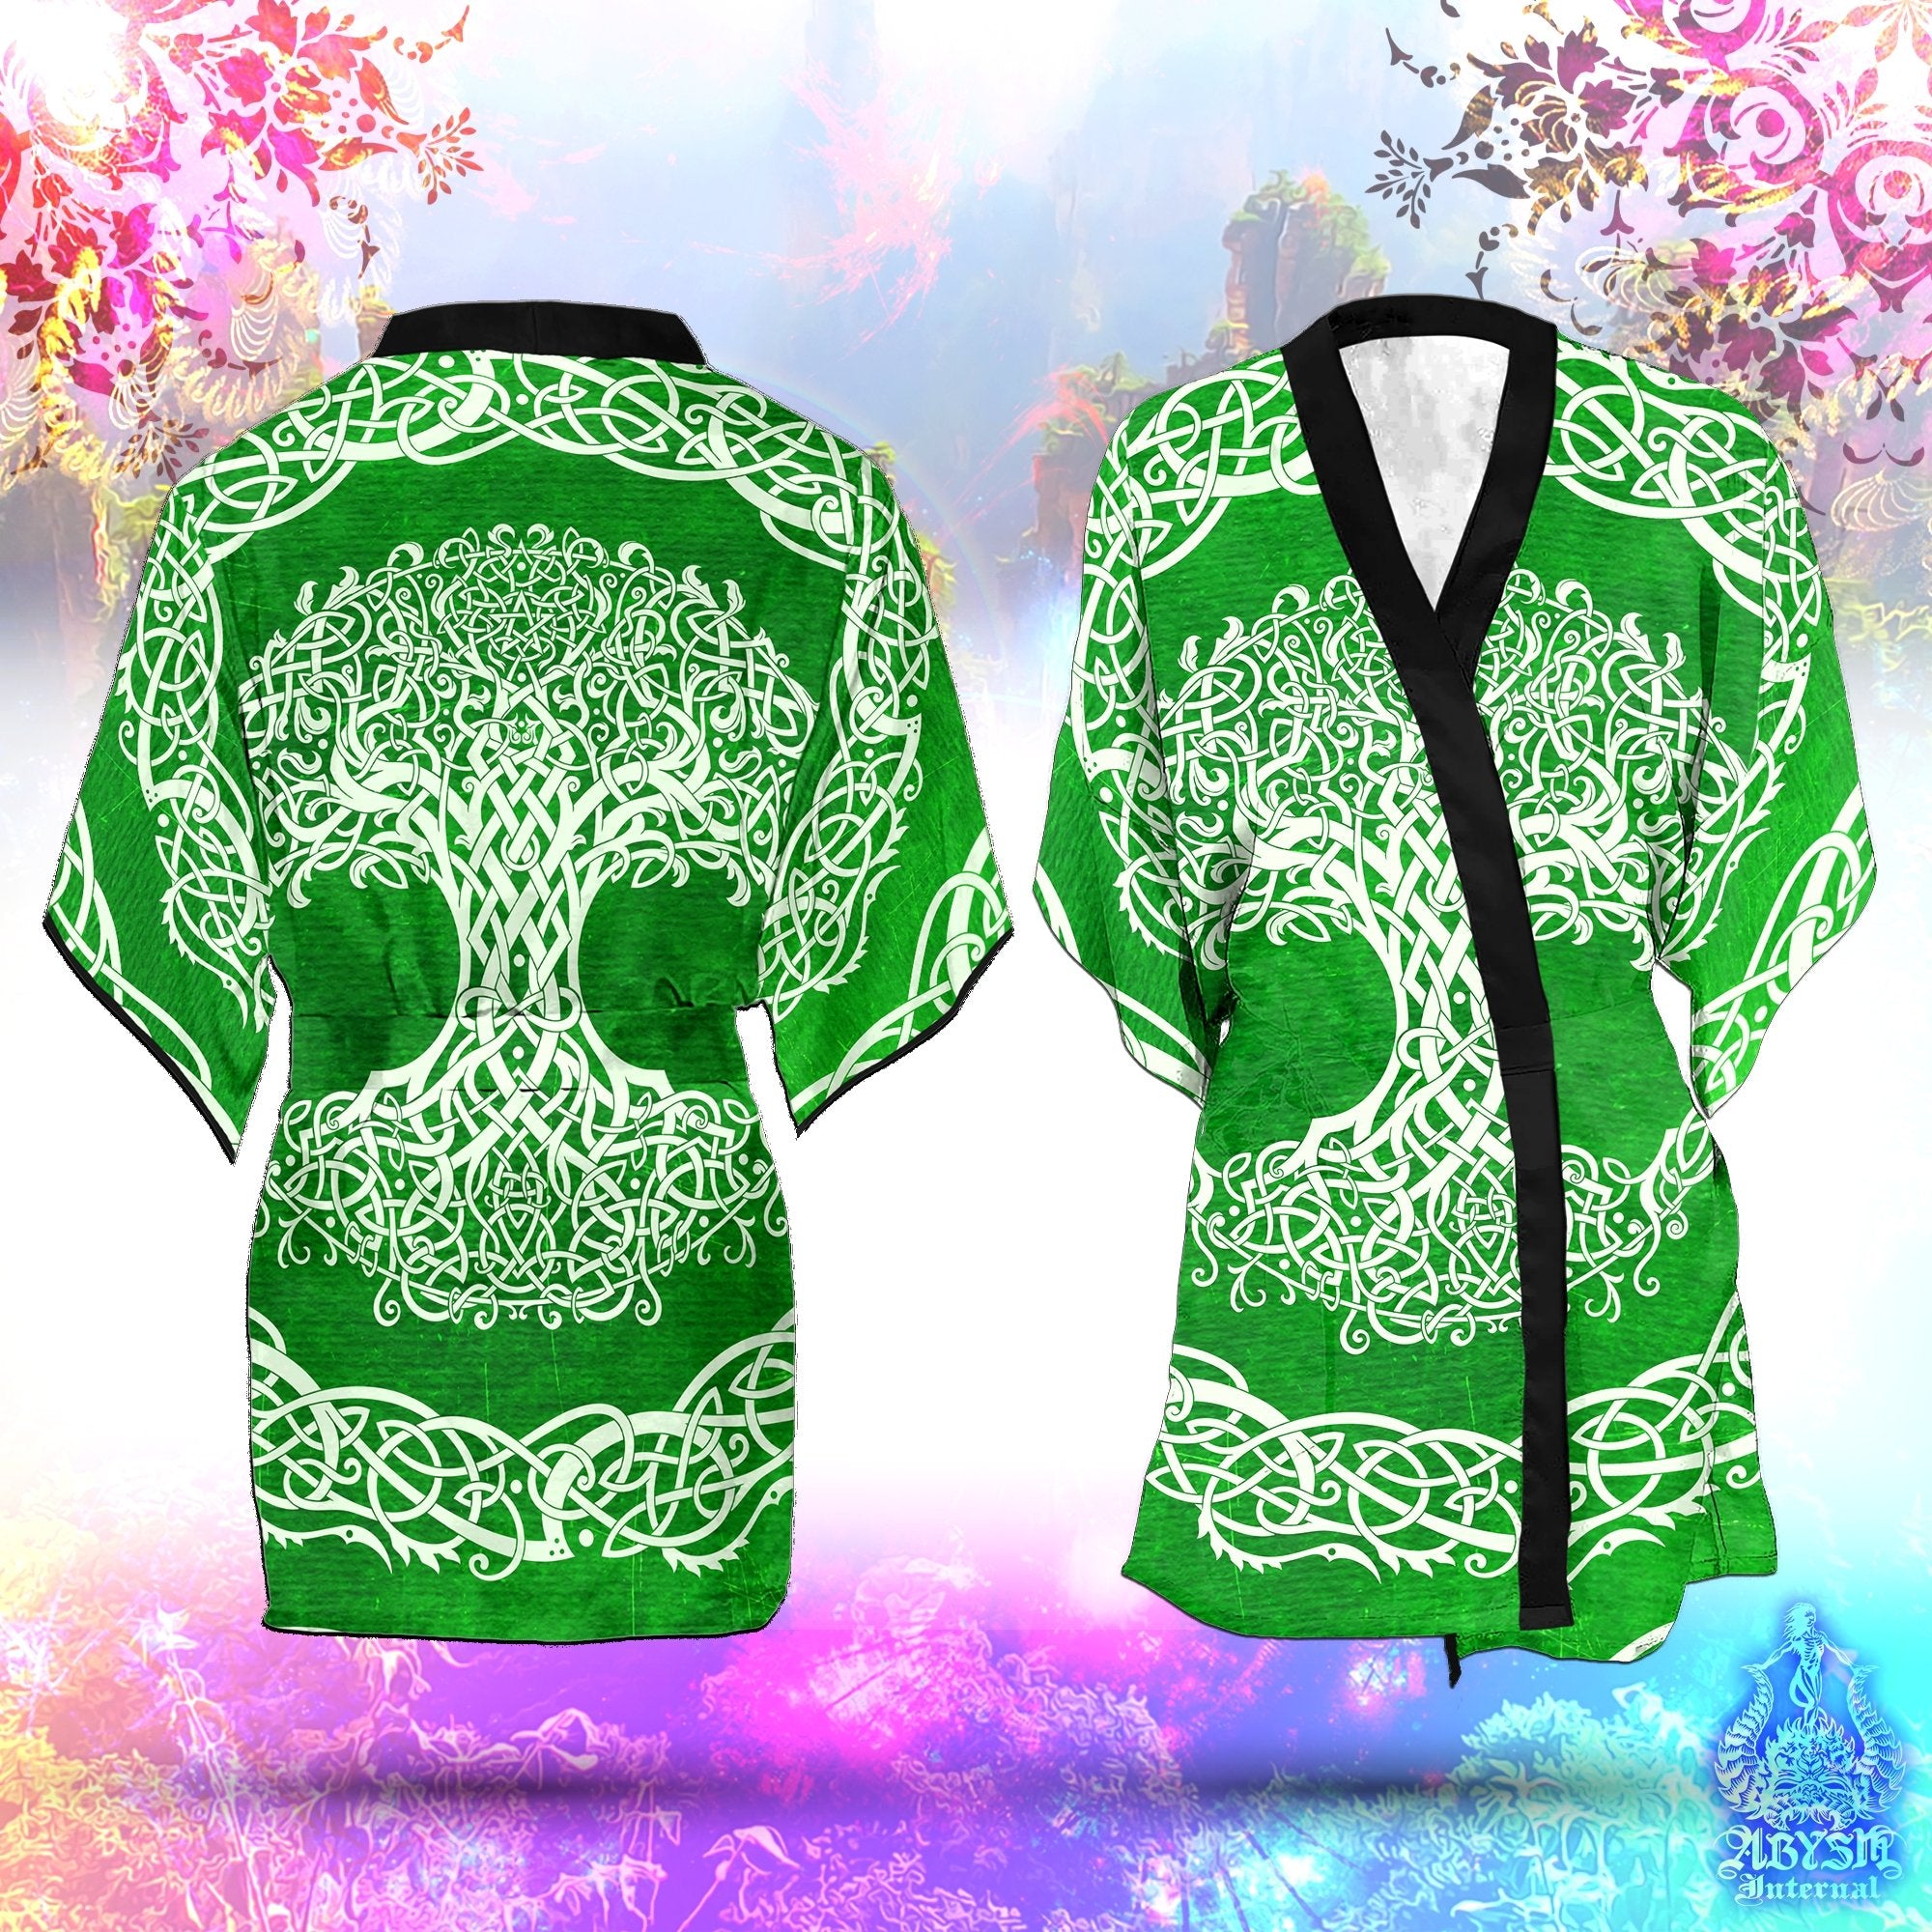 Tree of Life Cover Up, Beach Outfit, Celtic Party Kimono, Wicca Summer Festival Robe, Witchy Indie and Alternative Clothing, Unisex - Green White - Abysm Internal